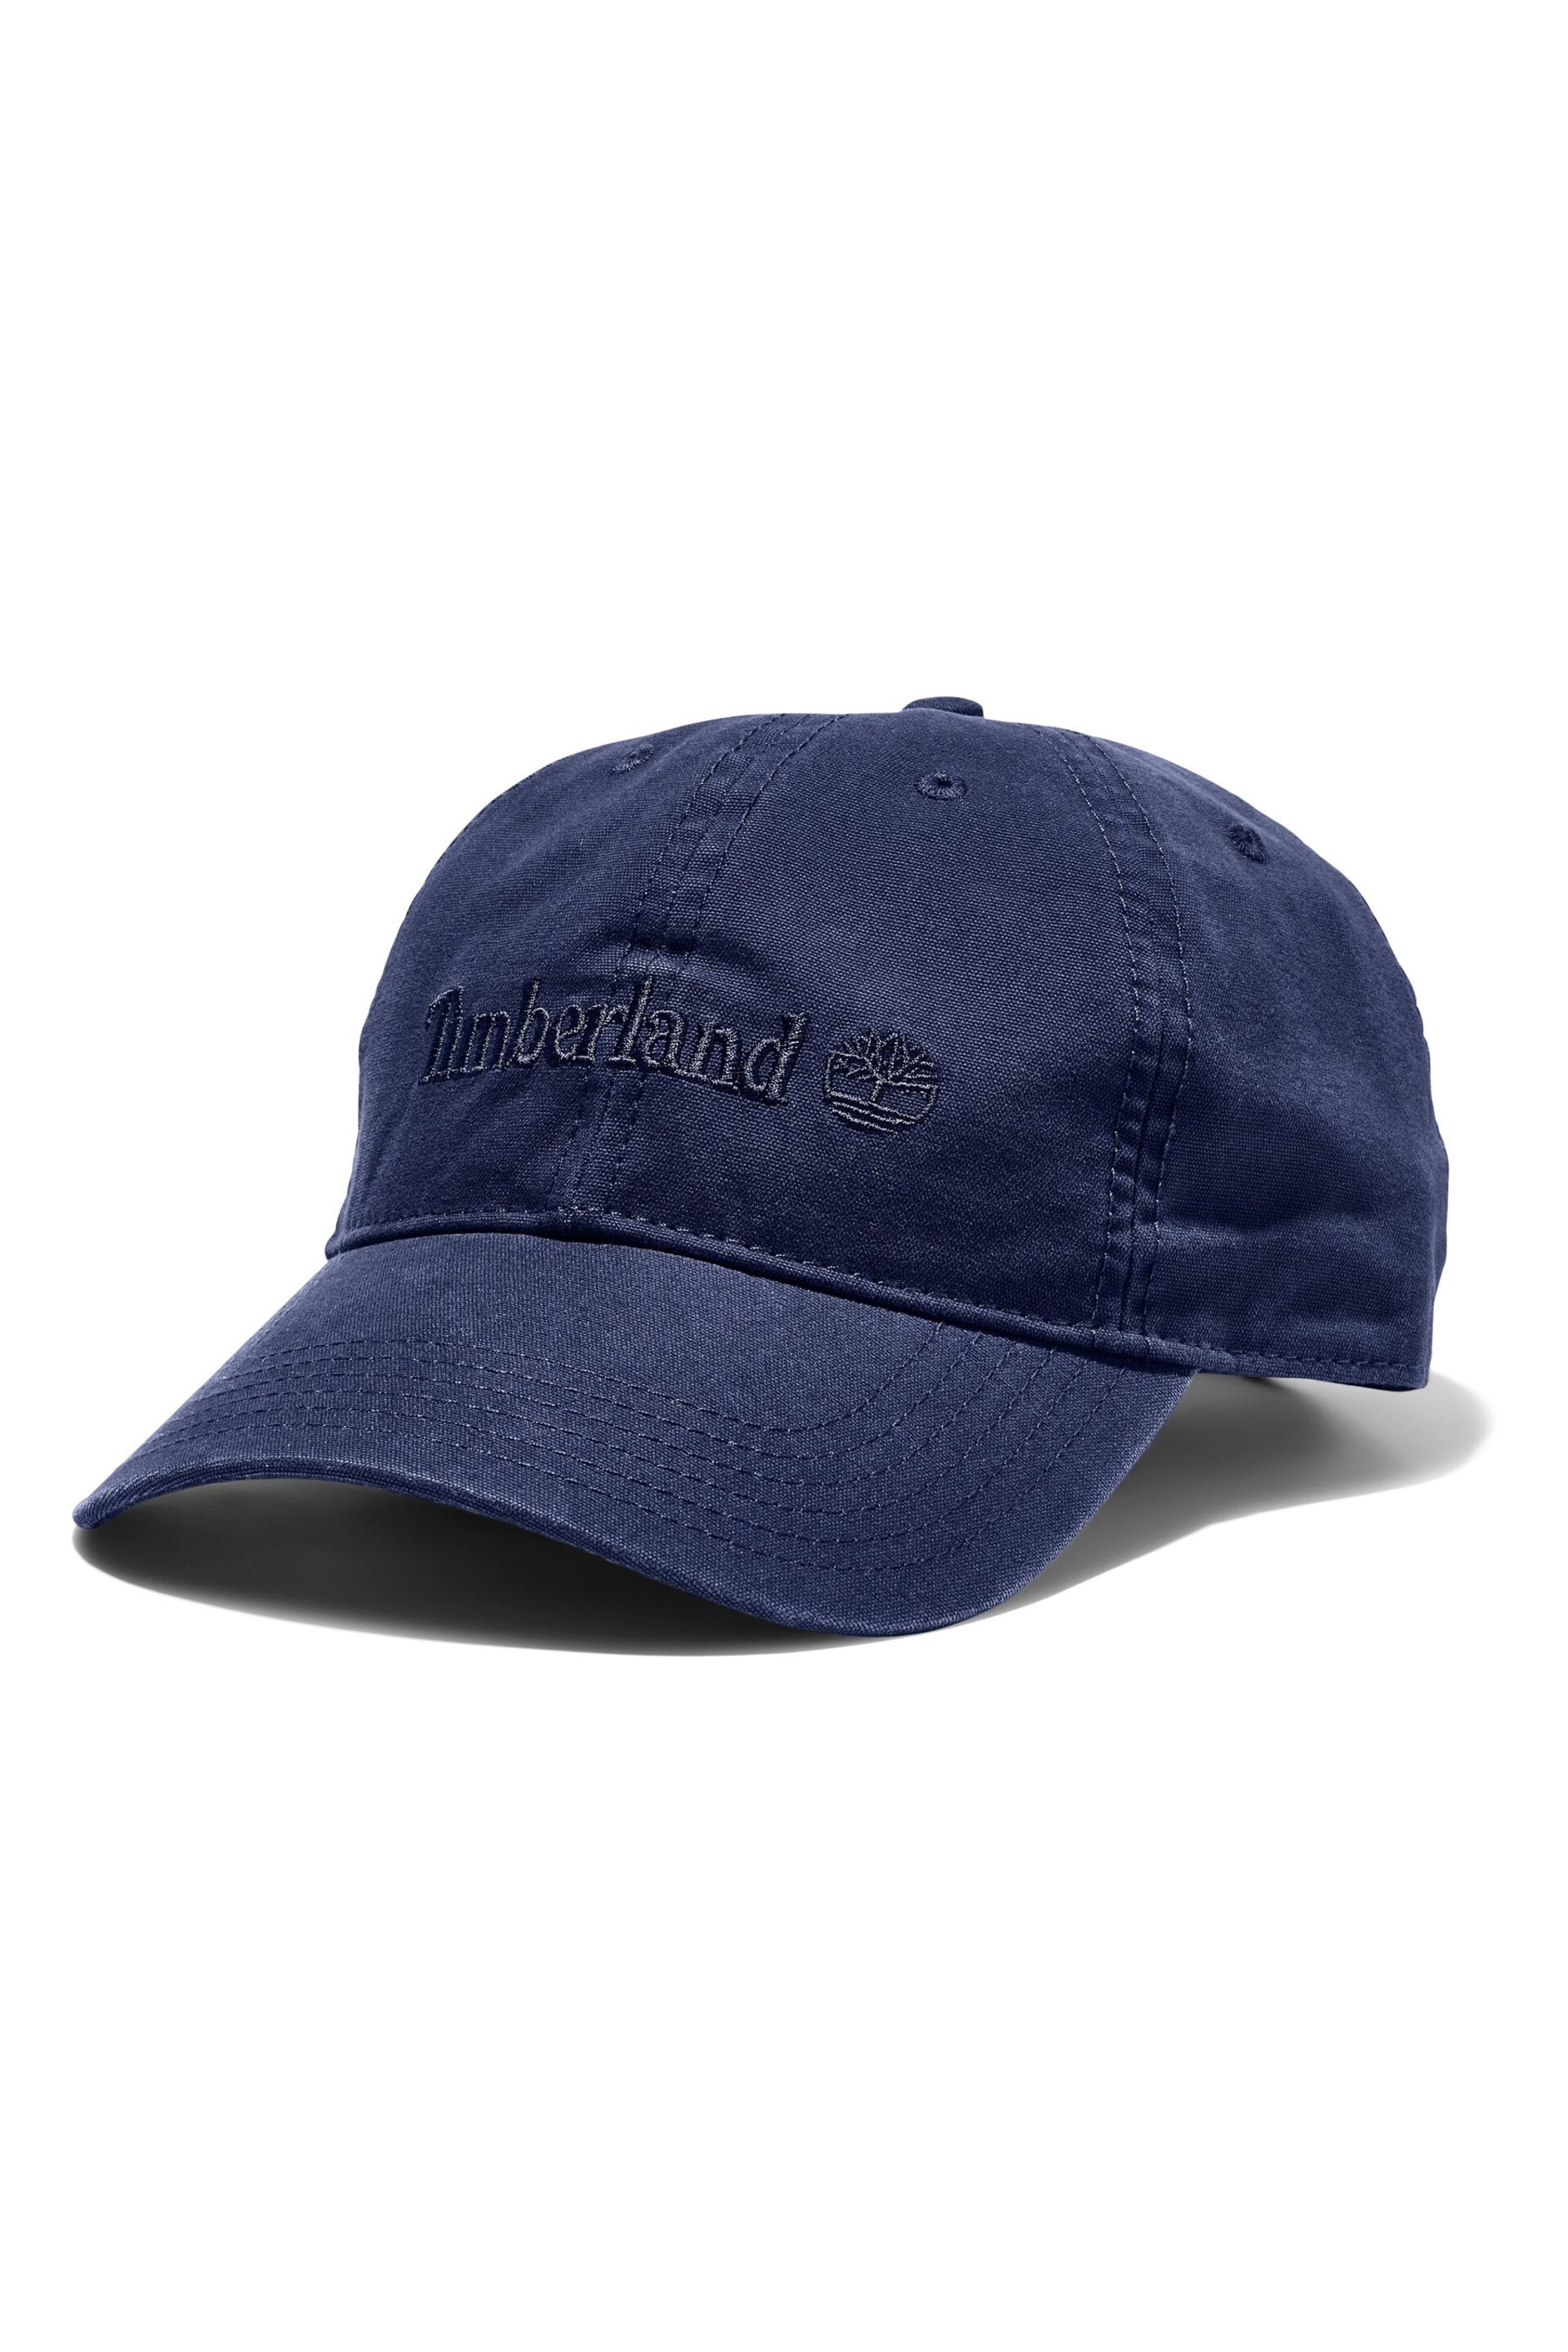 Timberland Blue Cooper Hill Cotton Canvas Baseball Hat - Image 1 of 2